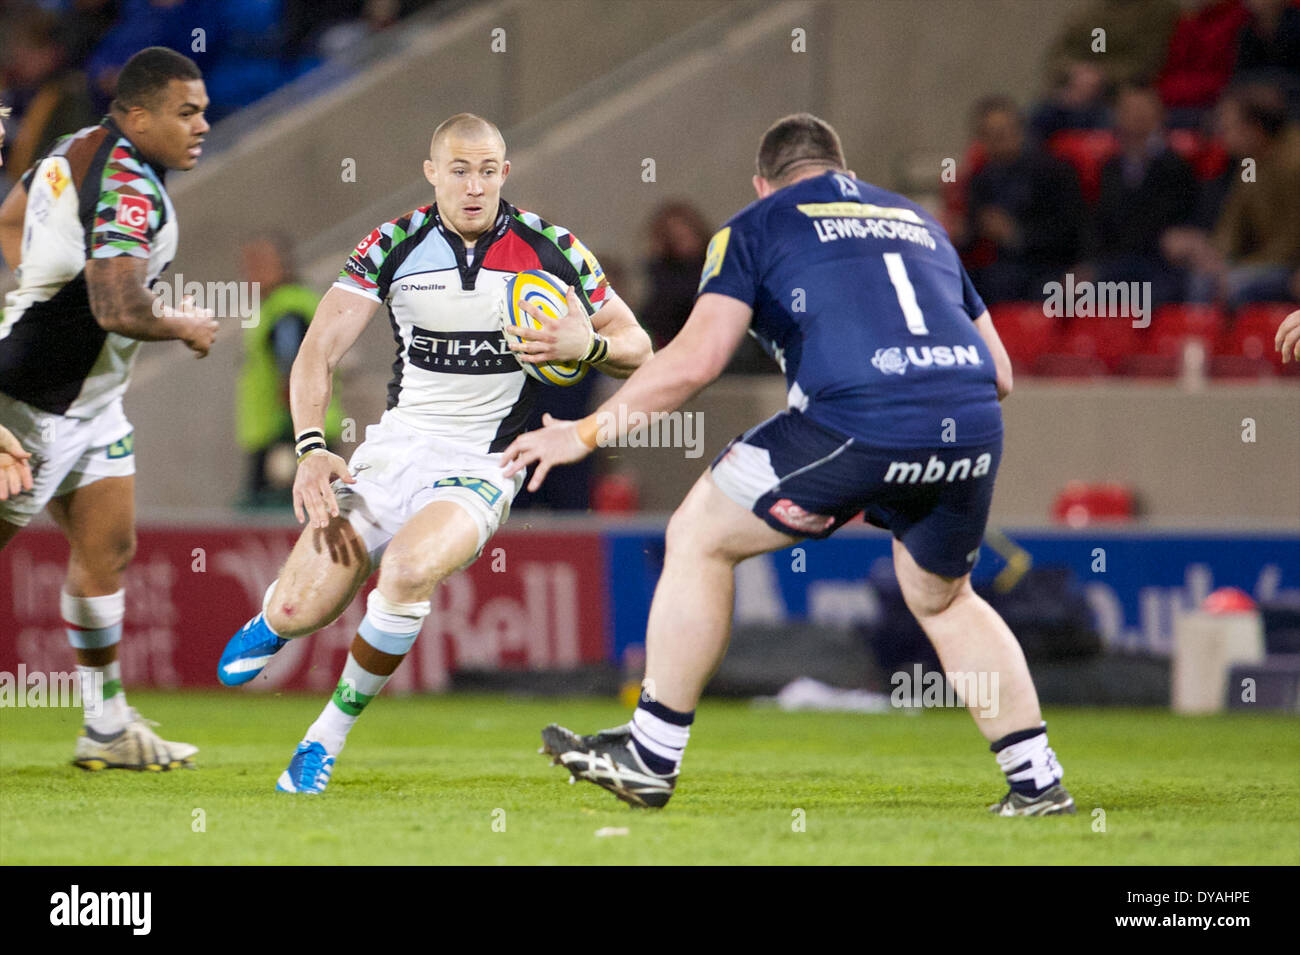 Sale, UK. 11th Apr, 2014. Harlequins fullback Mike Brown and Sale Sharks prop Eifion Lewis-Roberts in action during the Aviva Premiership Rugby match between Sale Sharks and Harlequins at the AJ Bell Stadium, Salford Credit:  Action Plus Sports/Alamy Live News Stock Photo